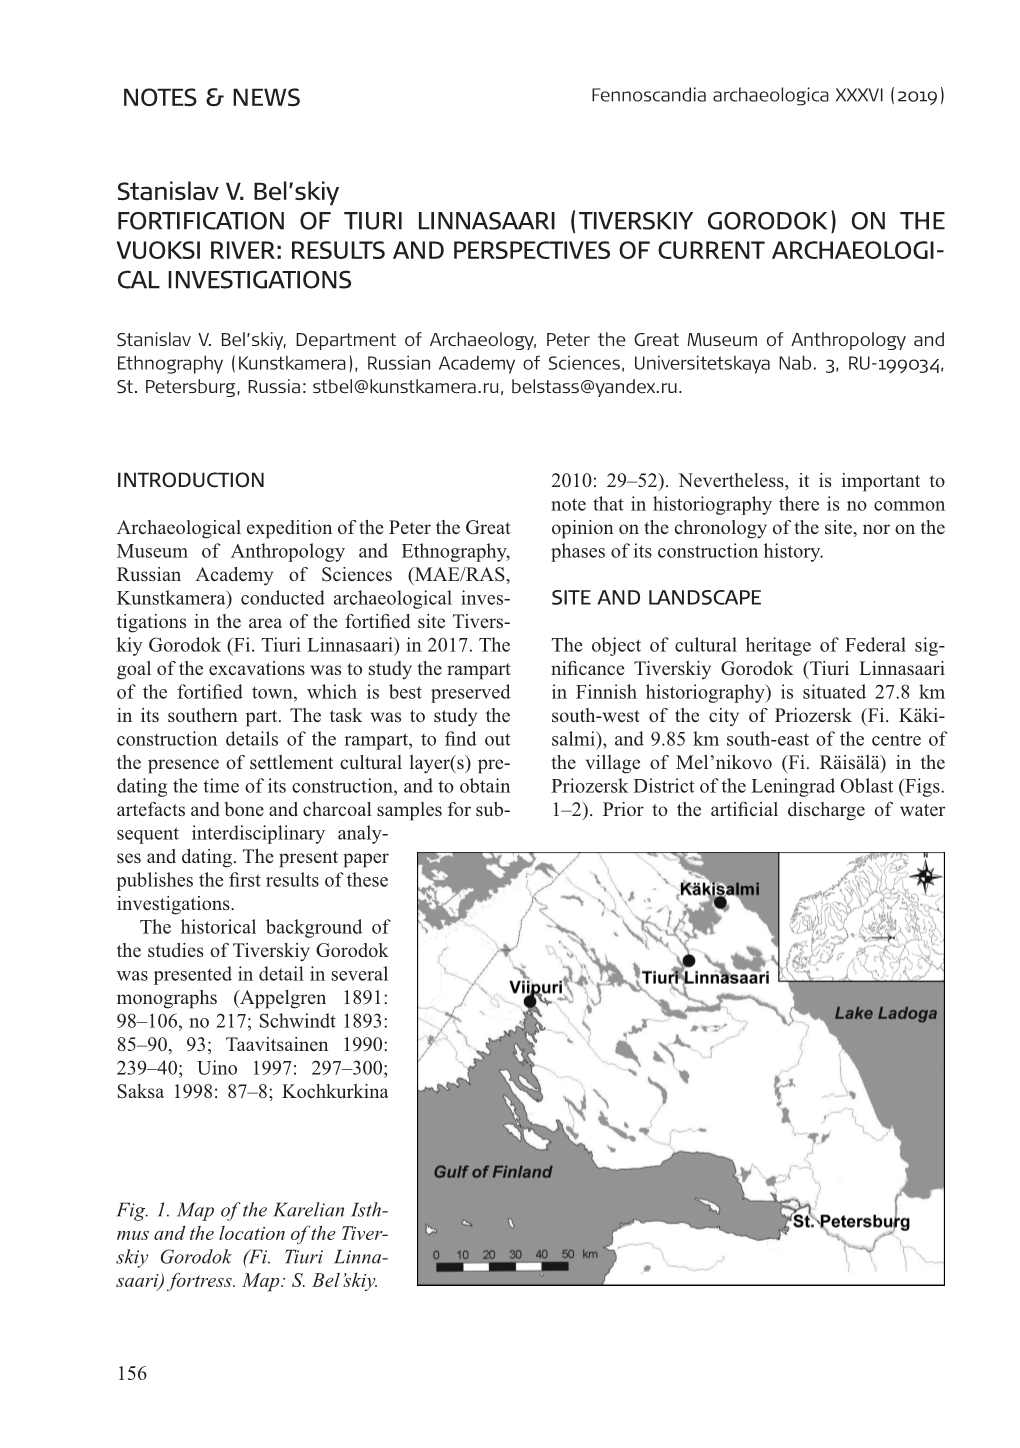 Tiverskiy Gorodok) on the Vuoksi River: Results and Perspectives of Current Archaeologi- Cal Investigations